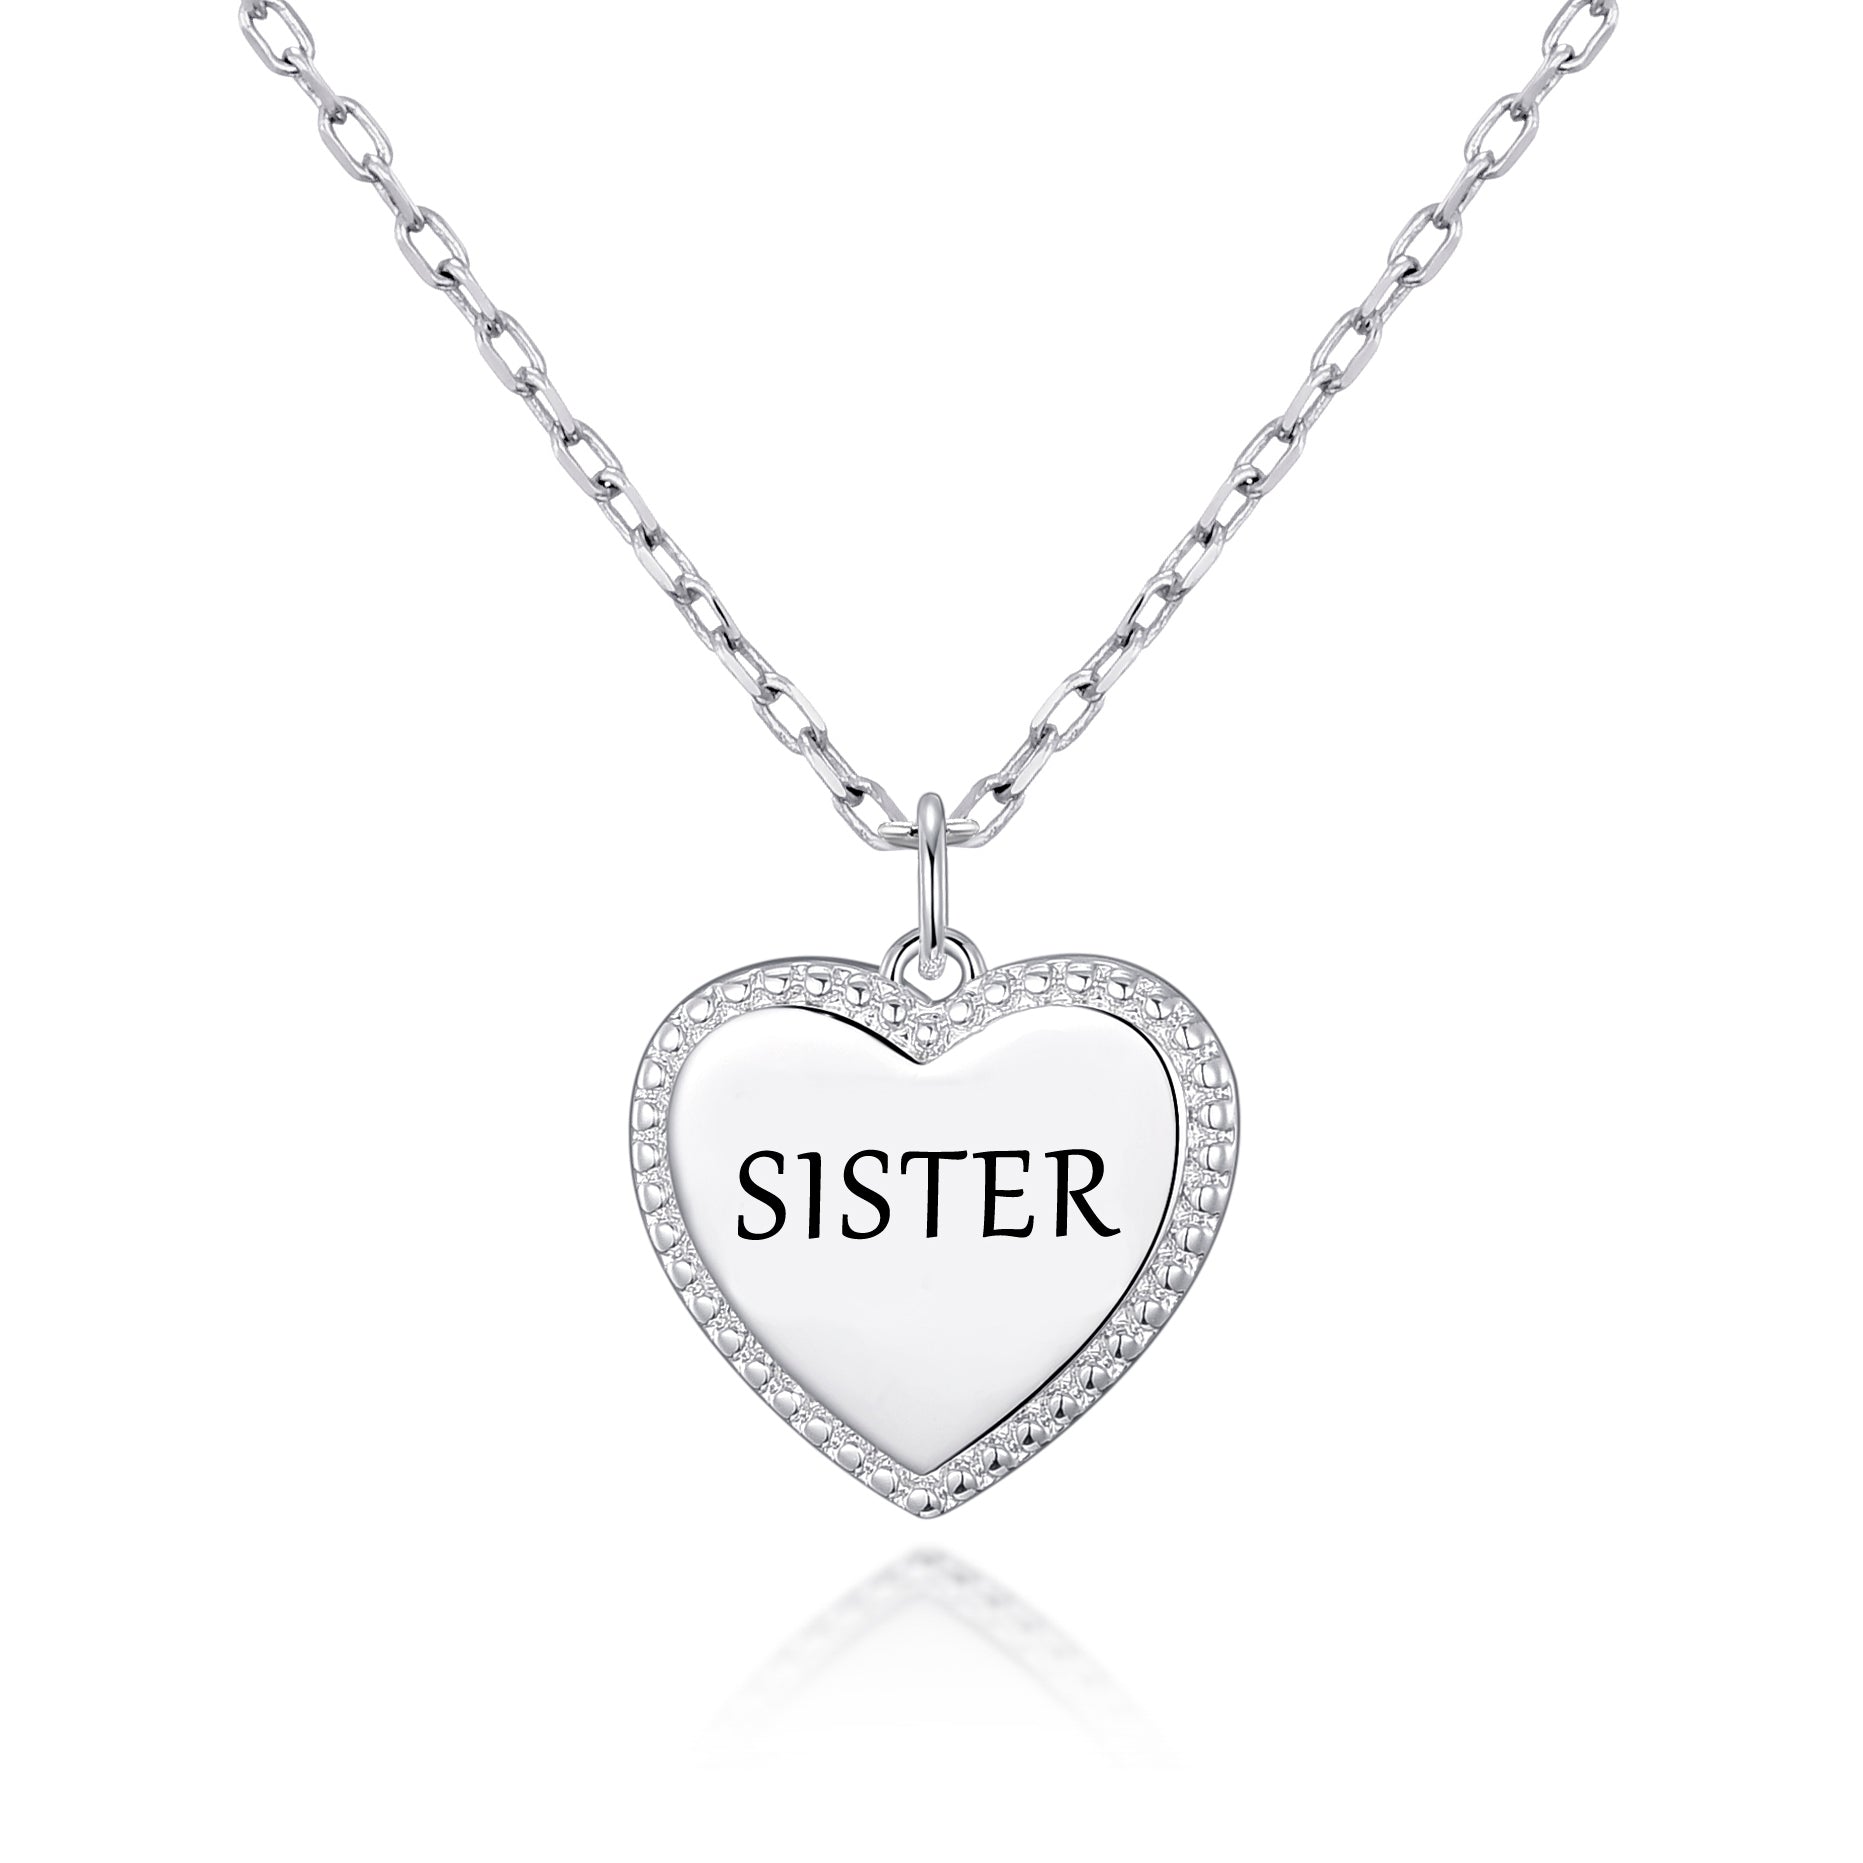 Silver Plated Filigree Heart Sister Necklace by Philip Jones Jewellery